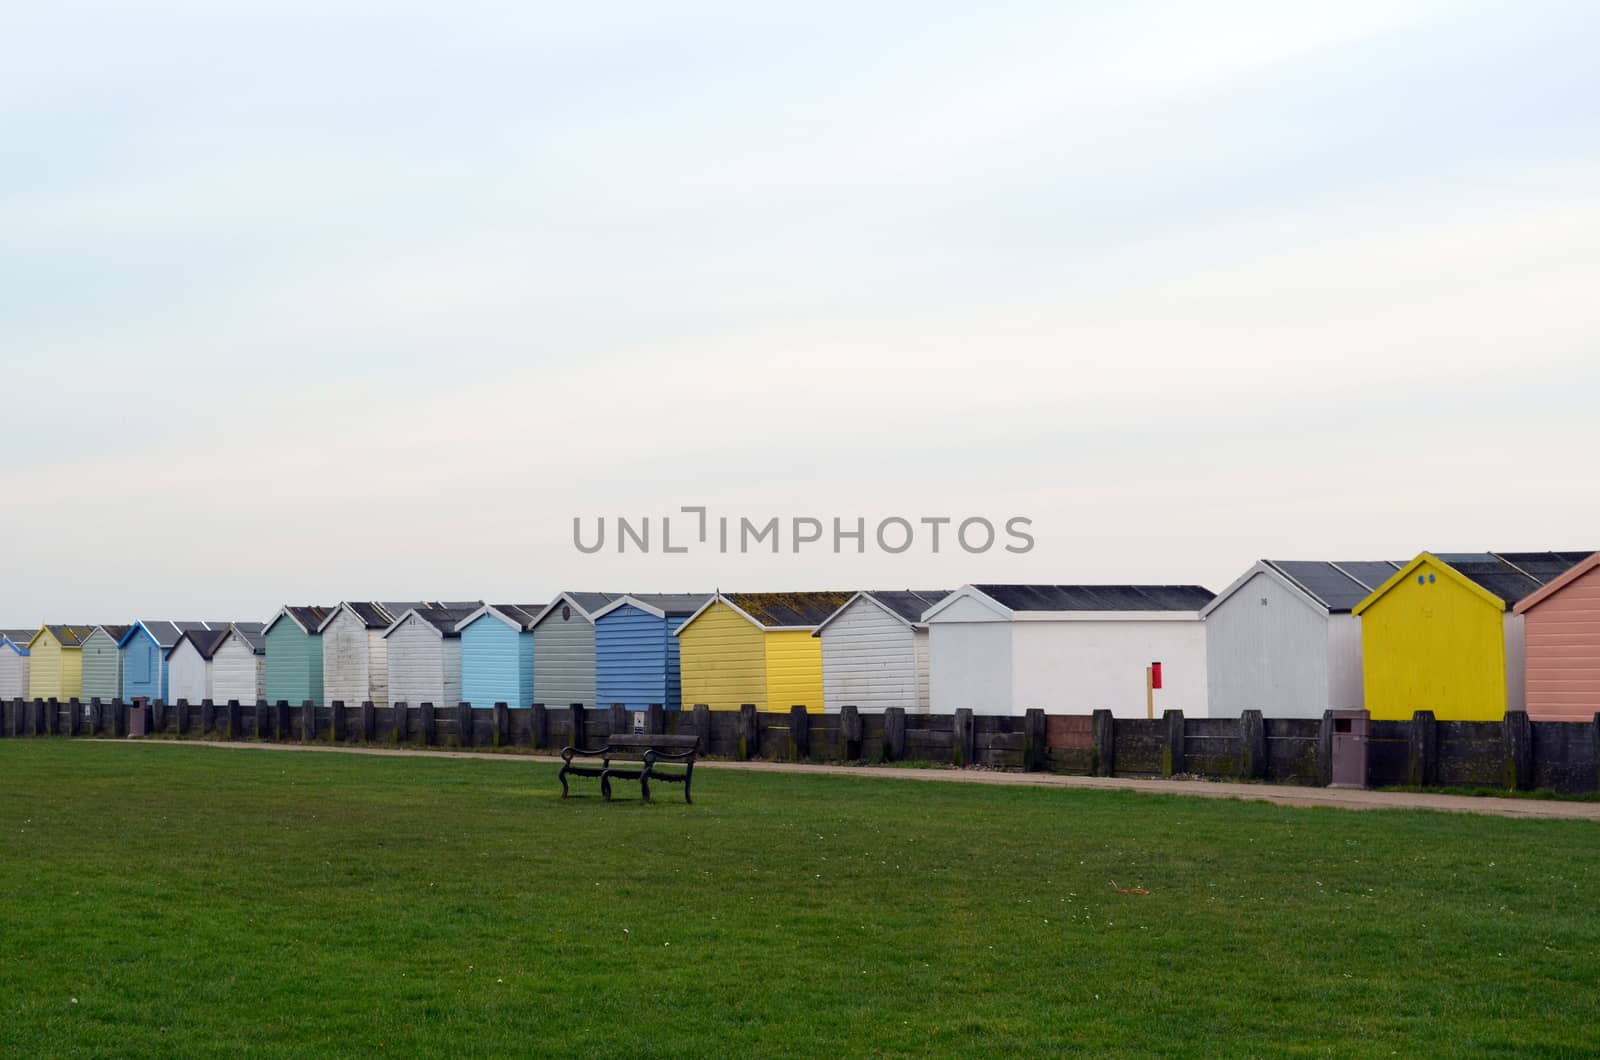 Beach huts in Winter by bunsview